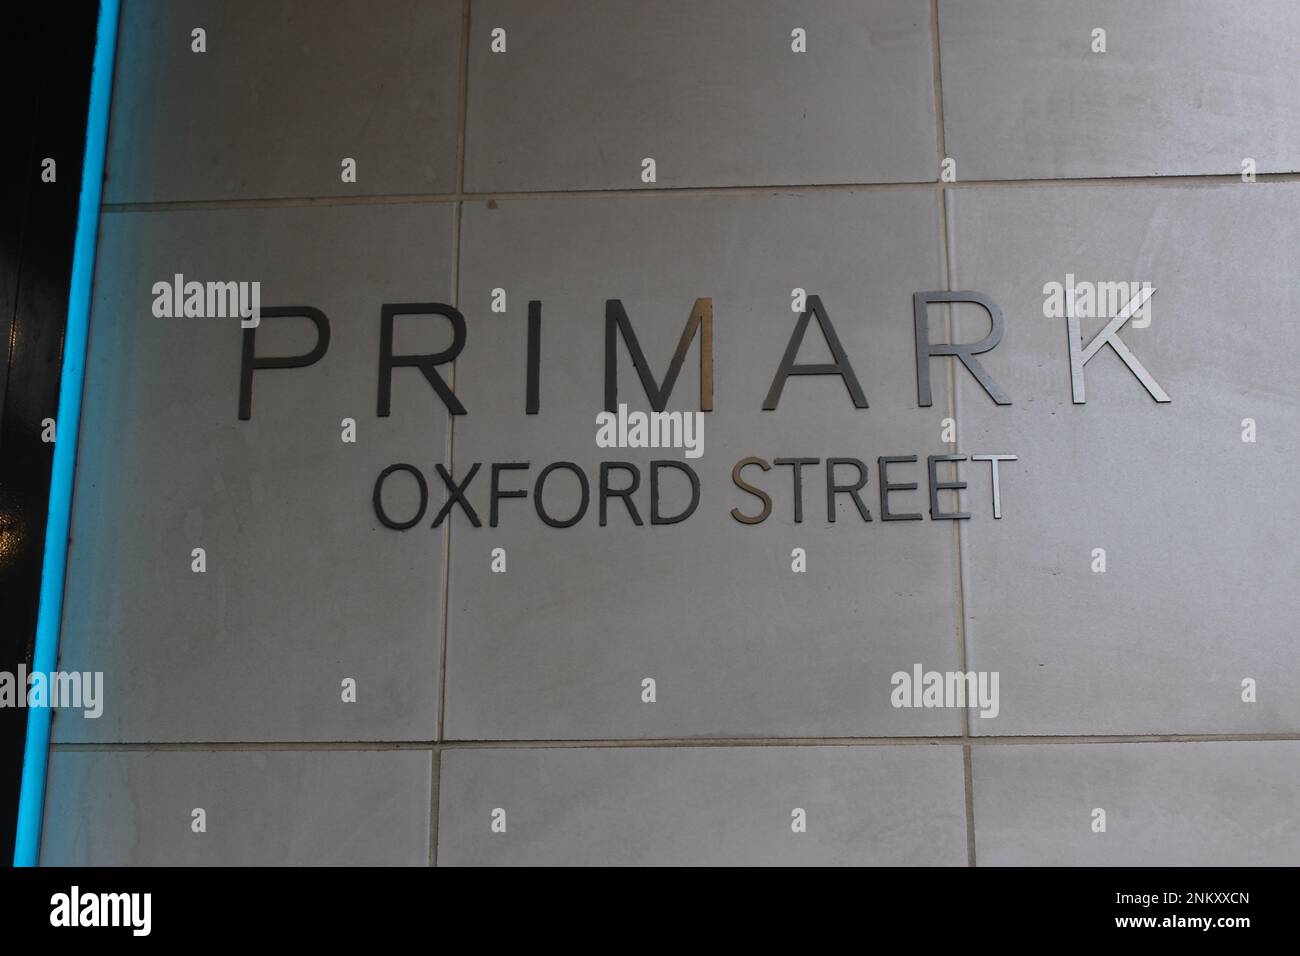 Primark store on Oxford Street store front signage. PRIMARK logo on Oxford Street in London Stock Photo